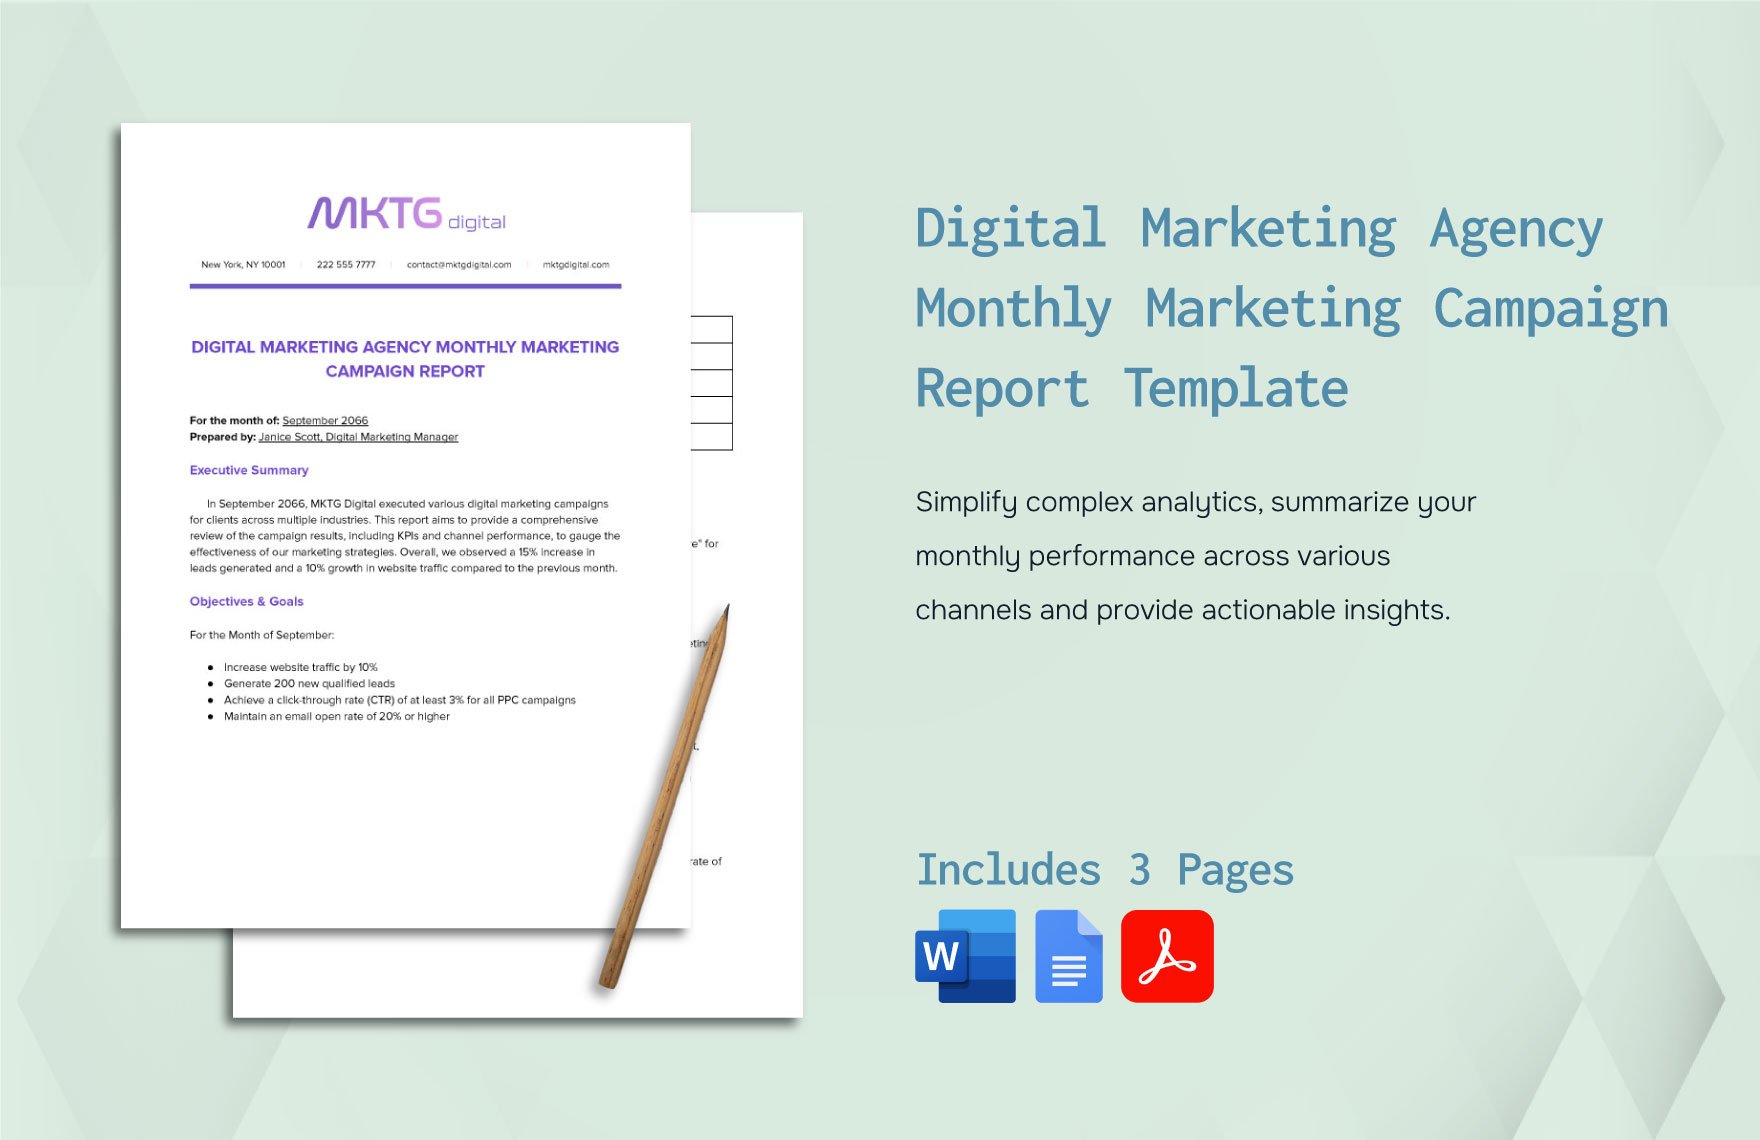 Digital Marketing Agency Monthly Marketing Campaign Report Template